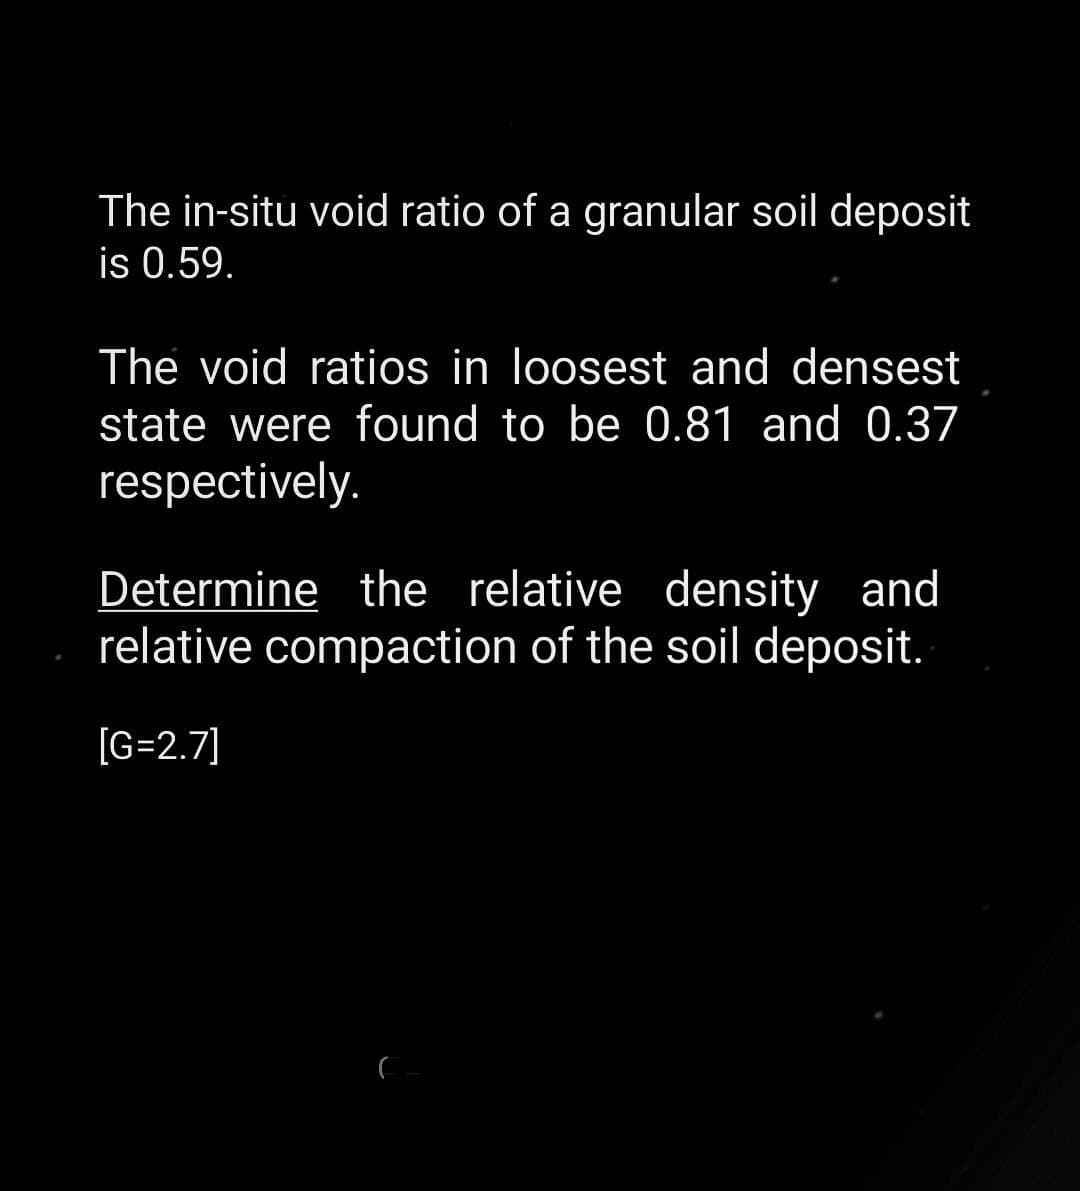 The in-situ void ratio of a granular soil deposit
is 0.59.
The void ratios in loosest and densest
state were found to be 0.81 and 0.37
respectively.
Determine the relative density and
relative compaction of the soil deposit.
[G=2.7]